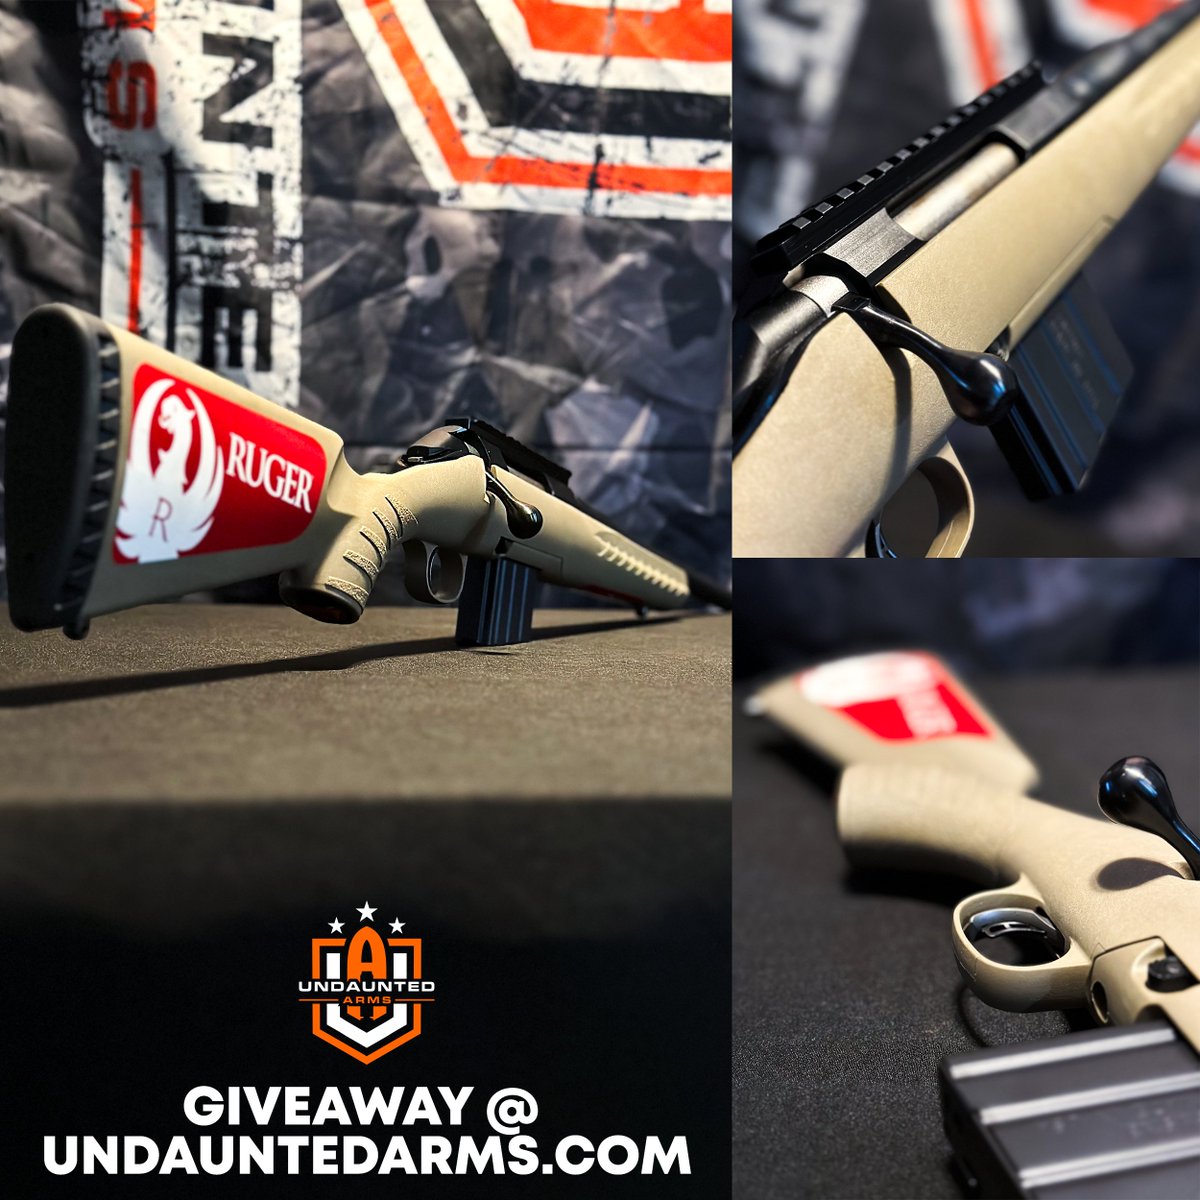 Launching our latest giveaway. FREE TO ENTER! undauntedarms.com/pages/giveaways #progun #2a #giveaway #DefendThe2nd